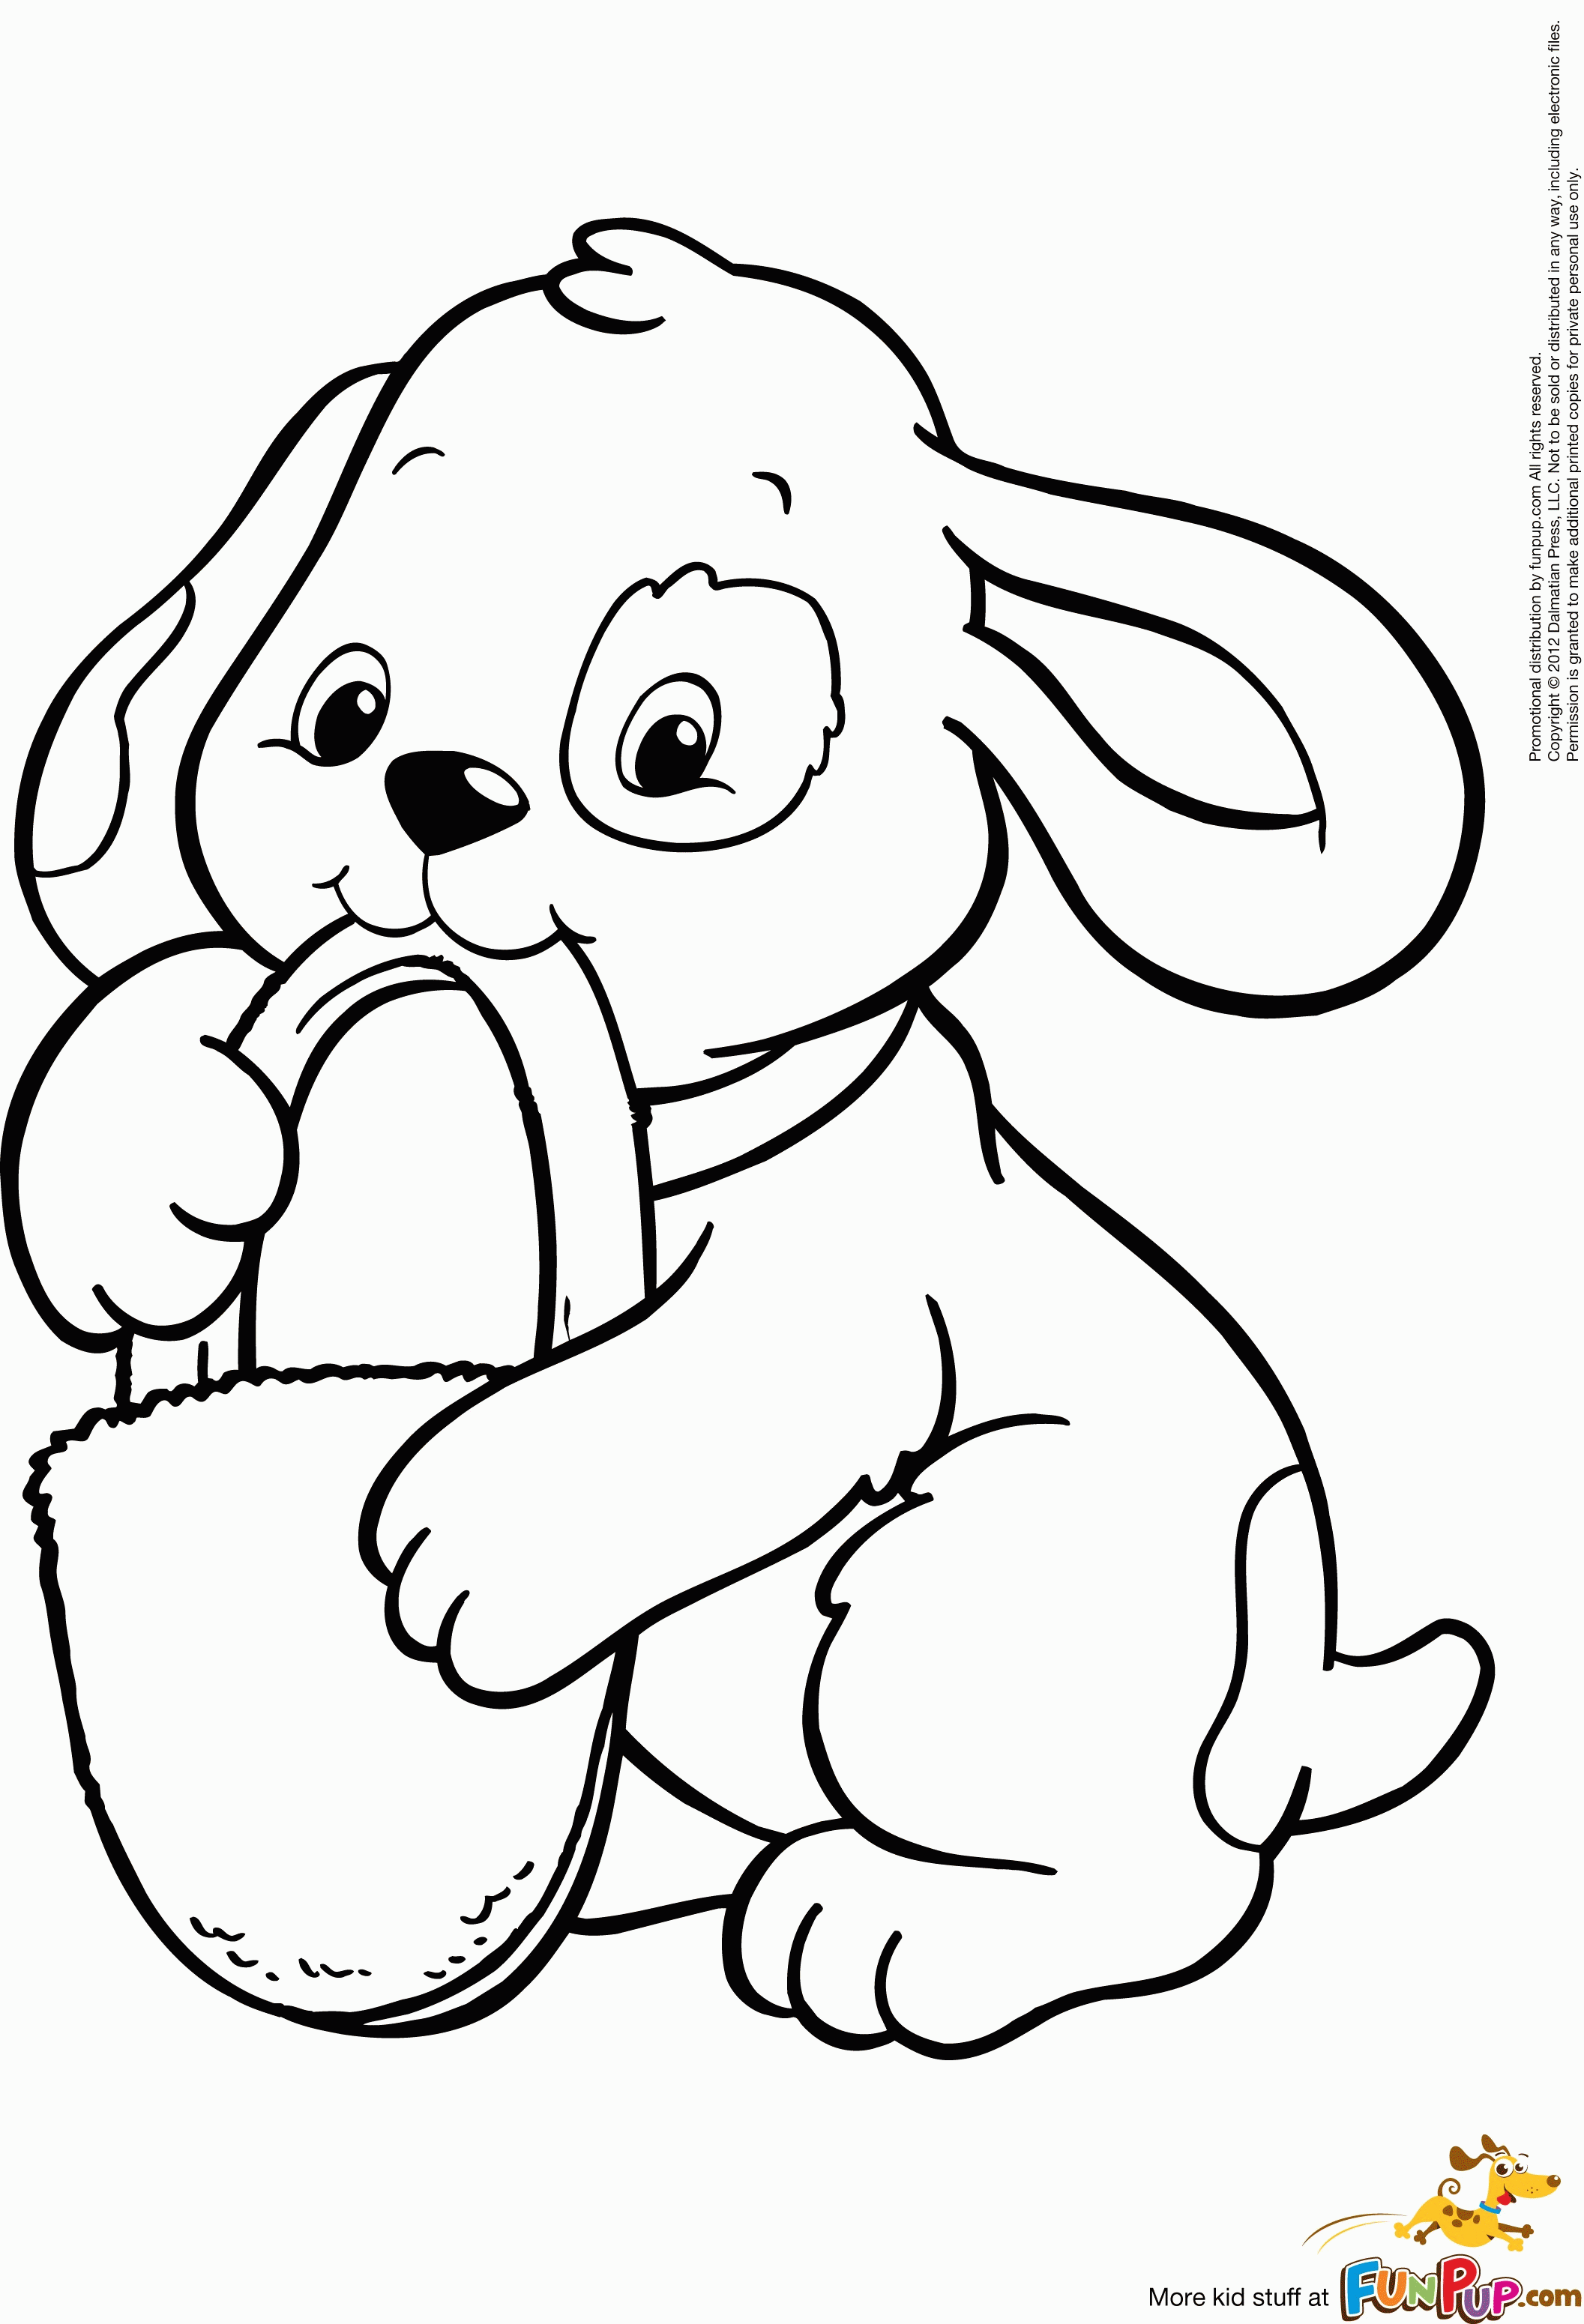 puppy-outline-coloring-page-coloring-home